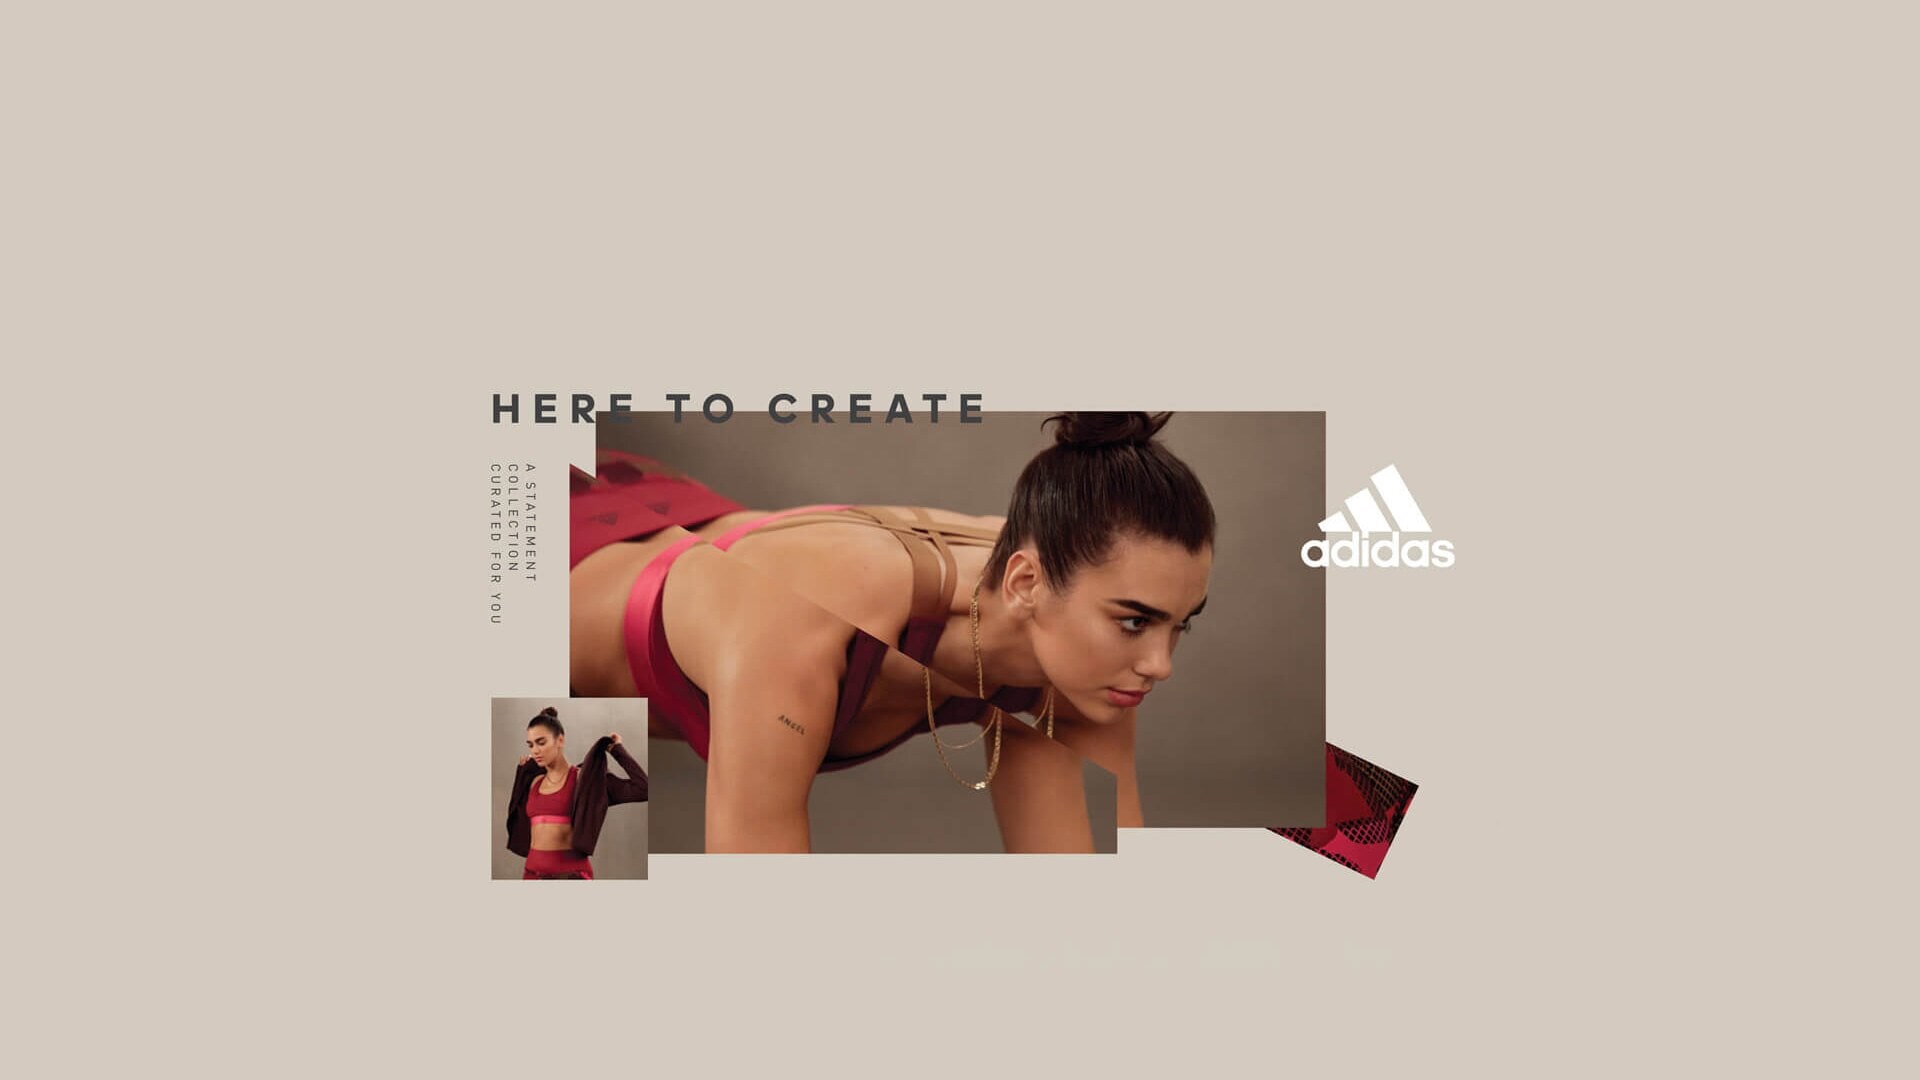 Woman in activewear from a sportswear brand, Adidas Singapore